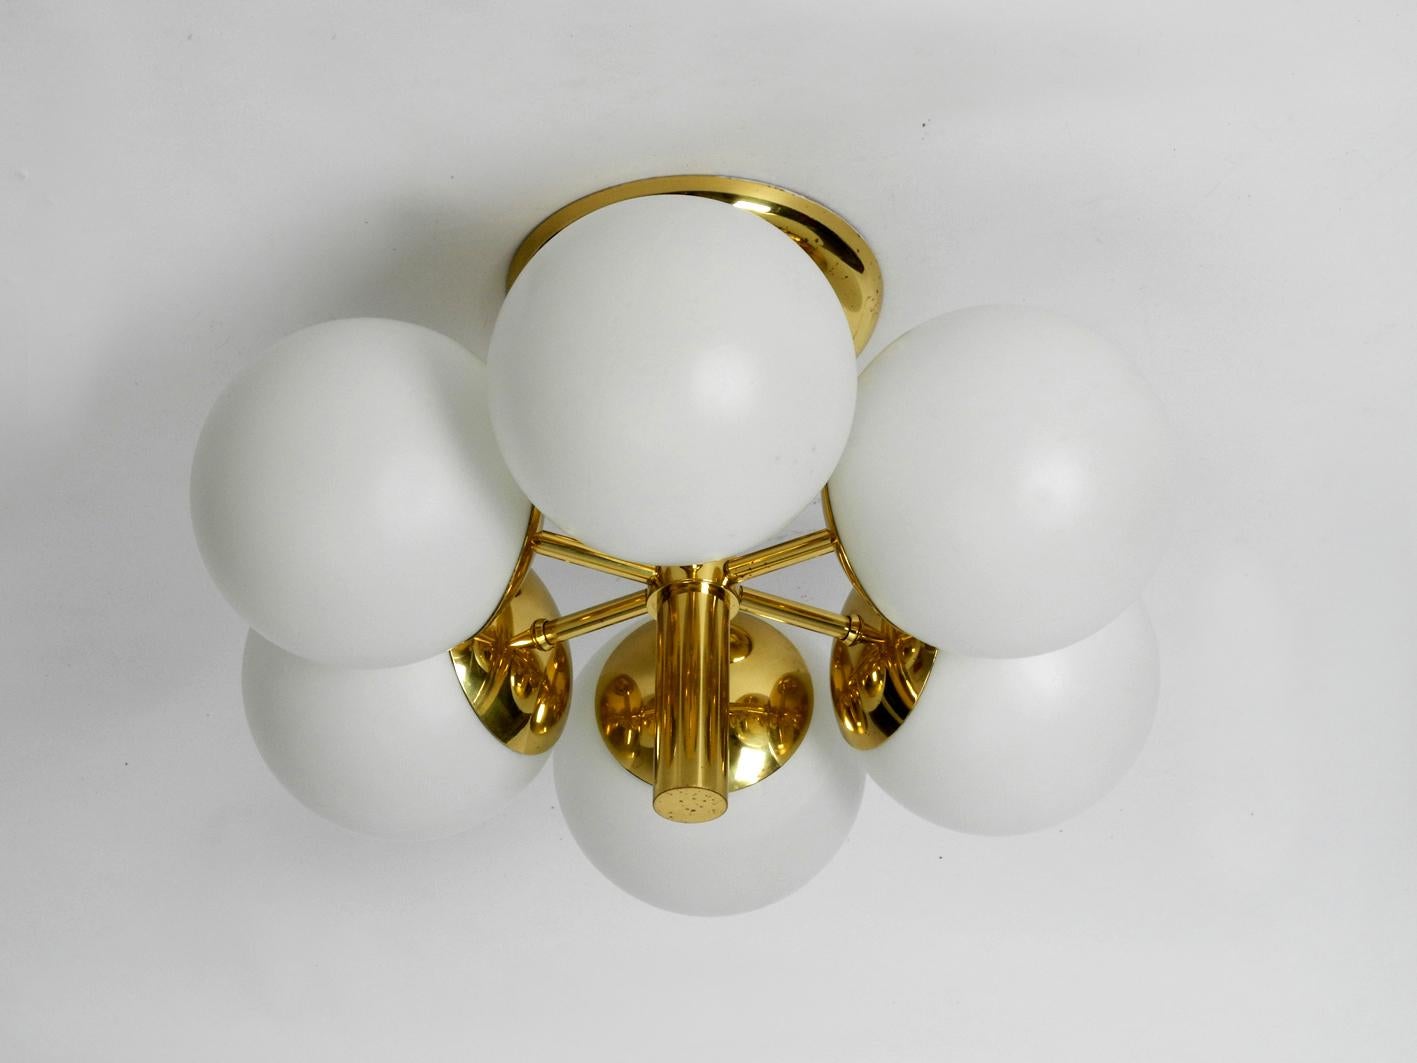 Beautiful Kaiser brass ceiling lamp with six opaline glass balls in white. Elegant sixties Space Age Atomic Design. Very good vintage condition without damages. Very few signs of wear. The brass has some very nice patina, which the pictures shows